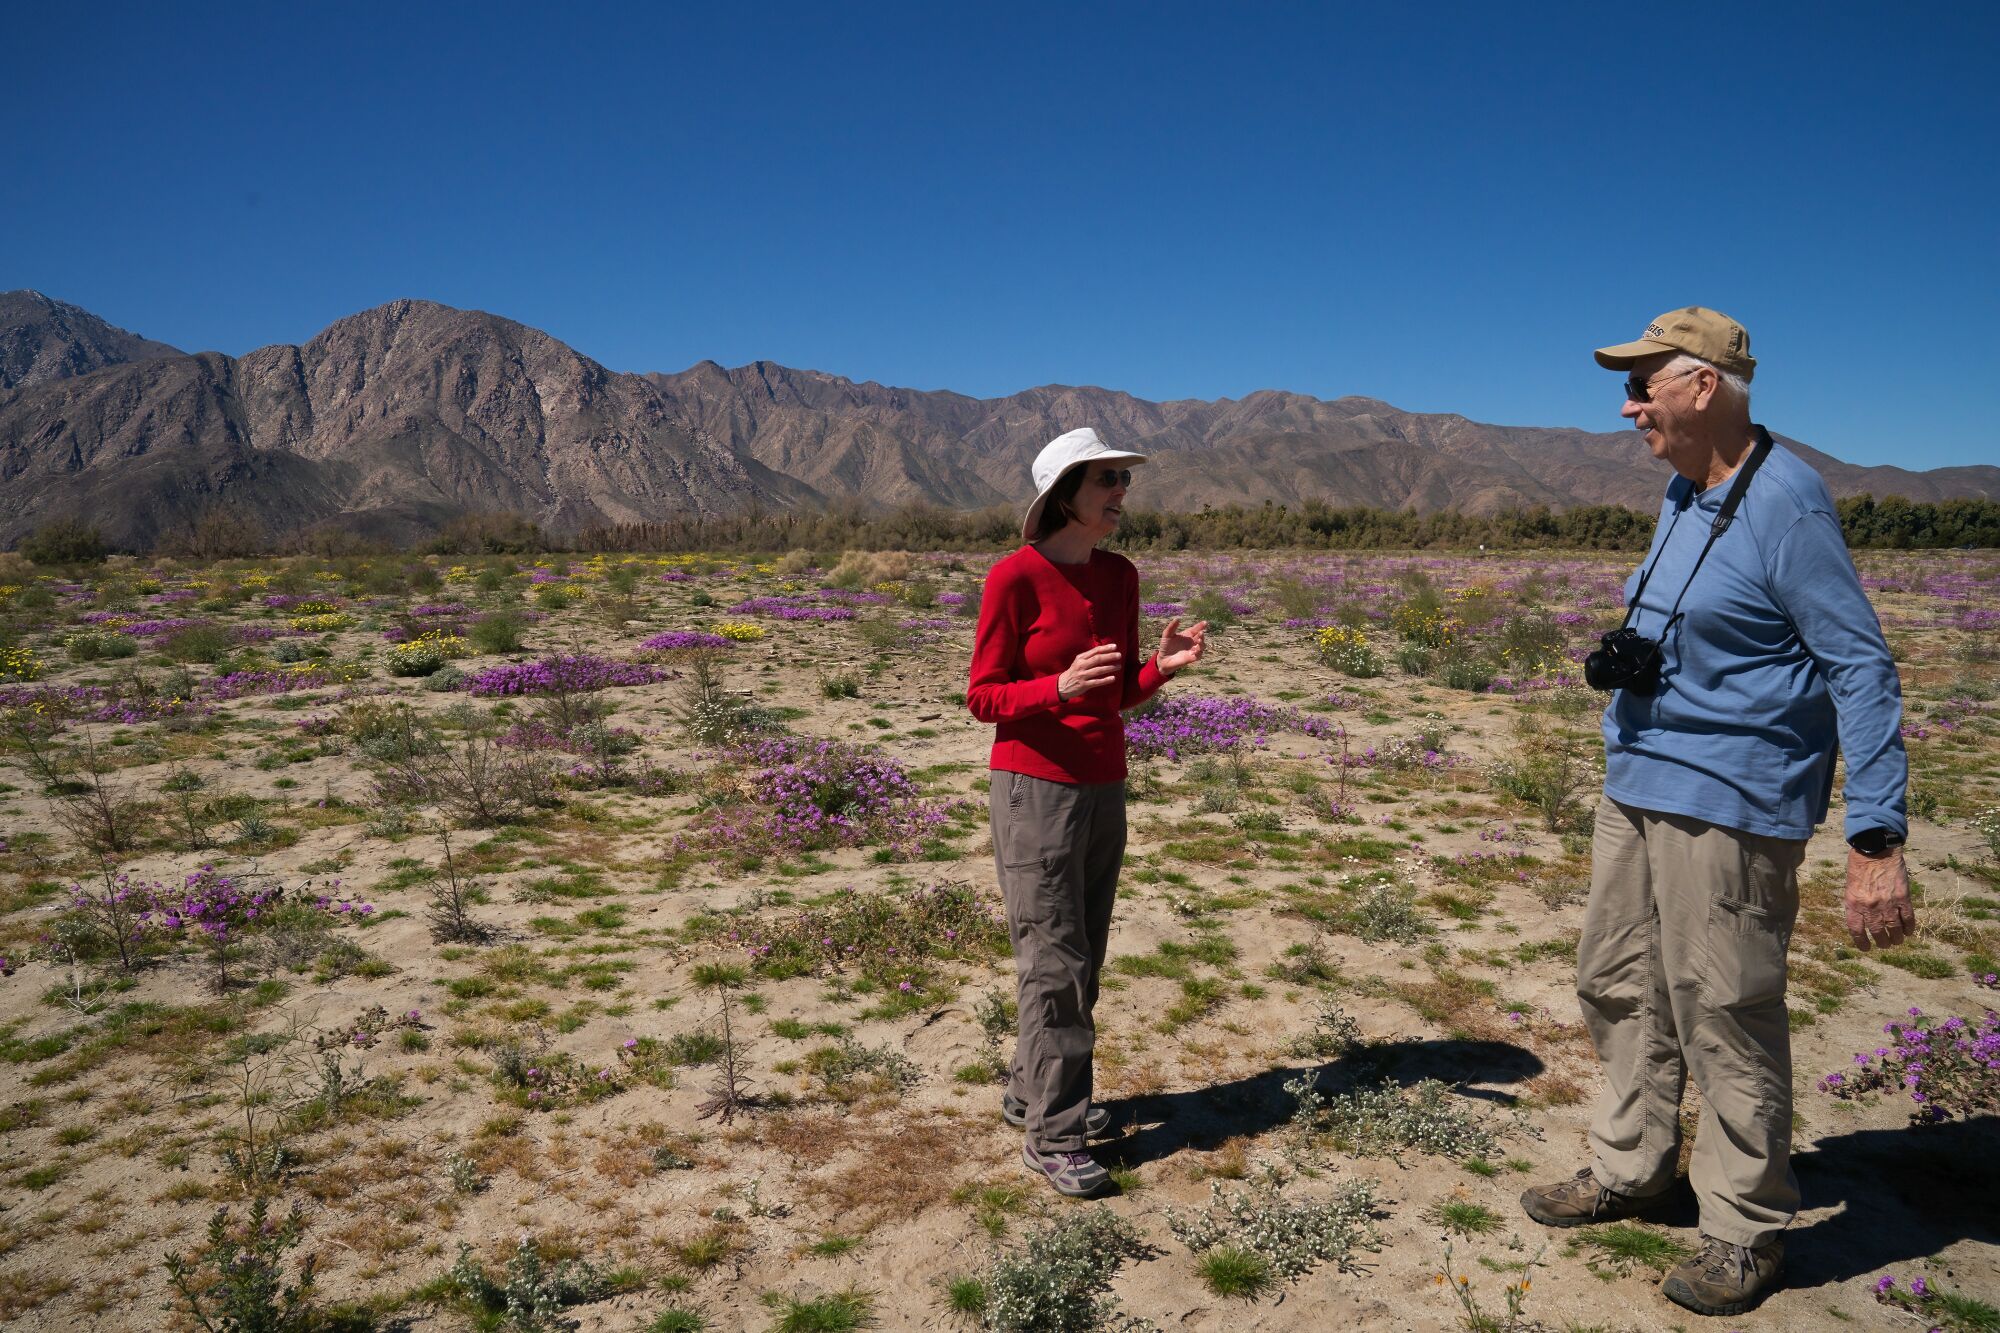 Millicent and her husband John Price walk in an open field at Anza-Borrego Desert State Park